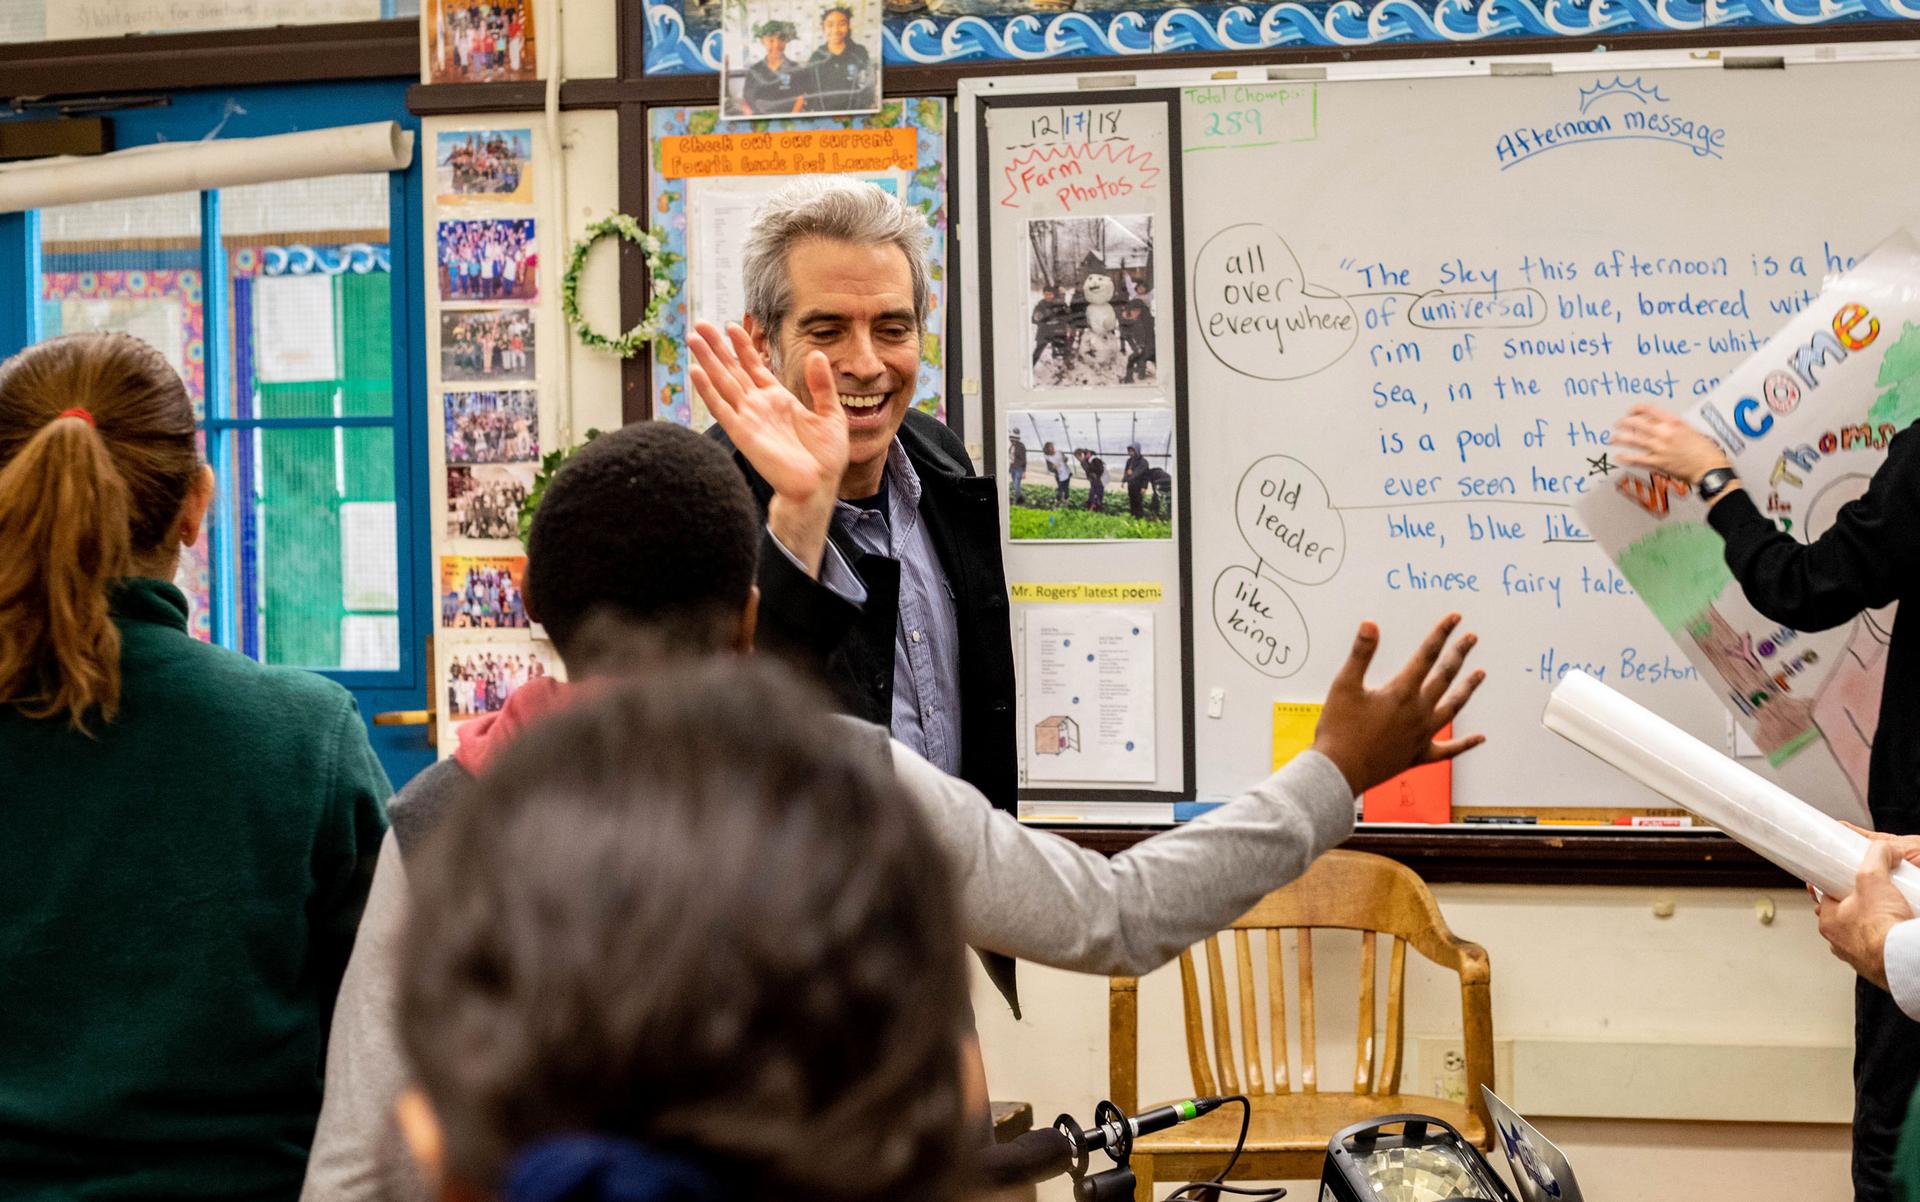 A man high fives a child in a school classroom.